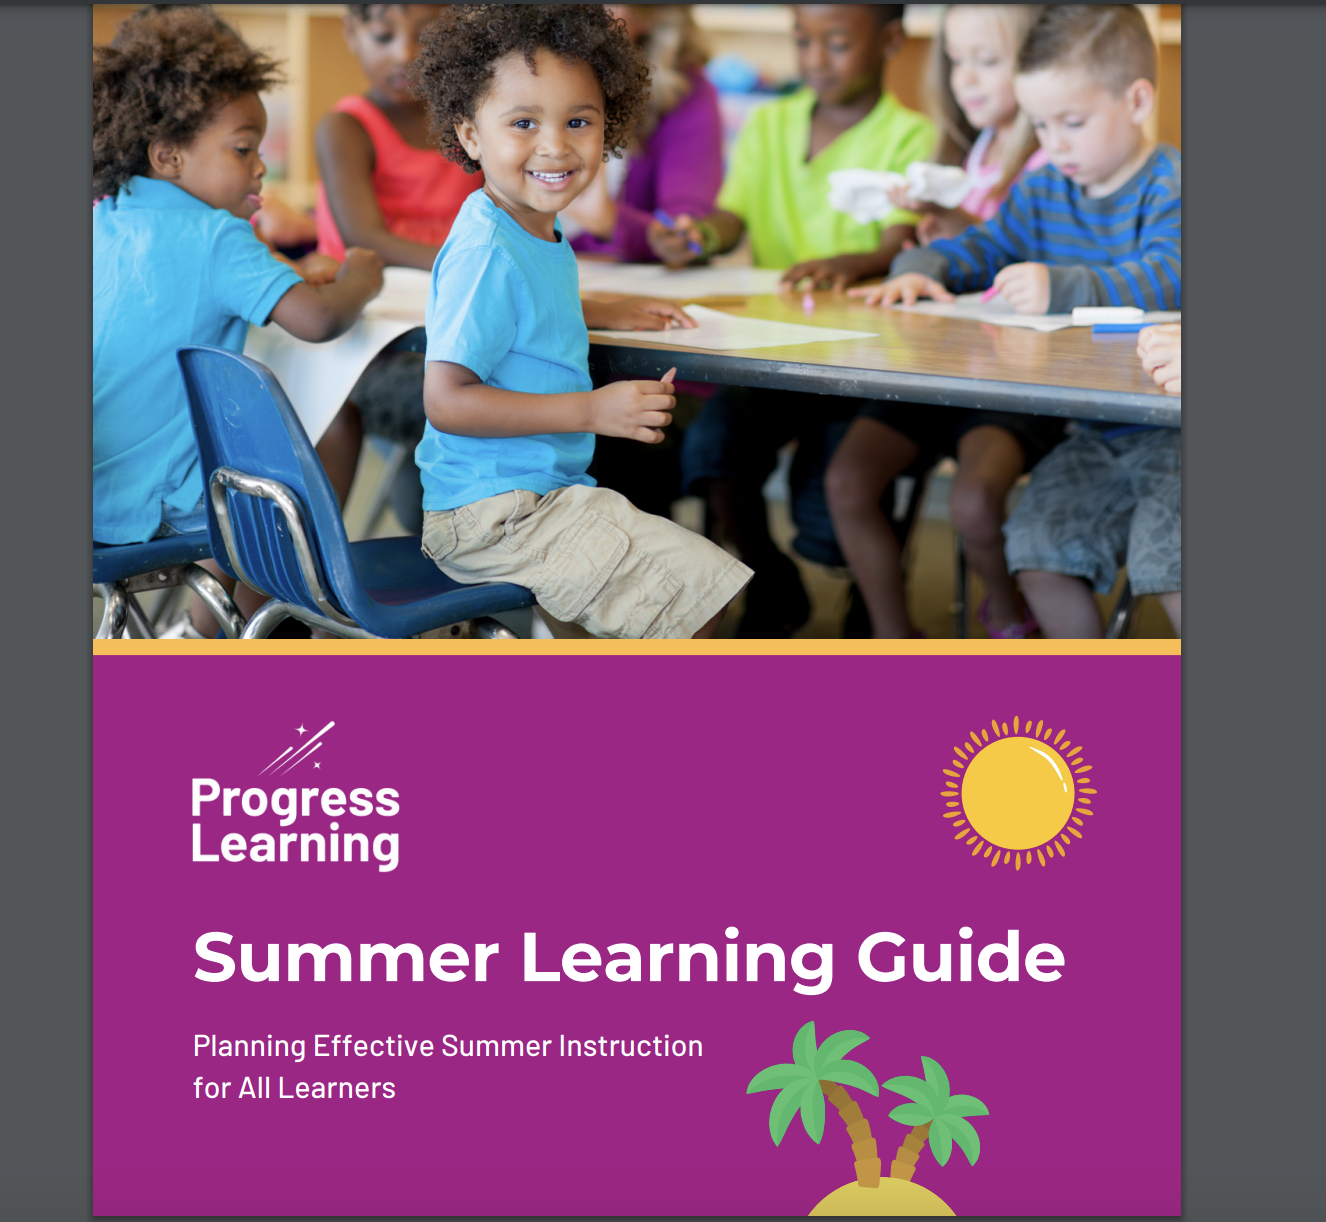 Progress Learning’s Summer Learning Guide: Free eBook Download